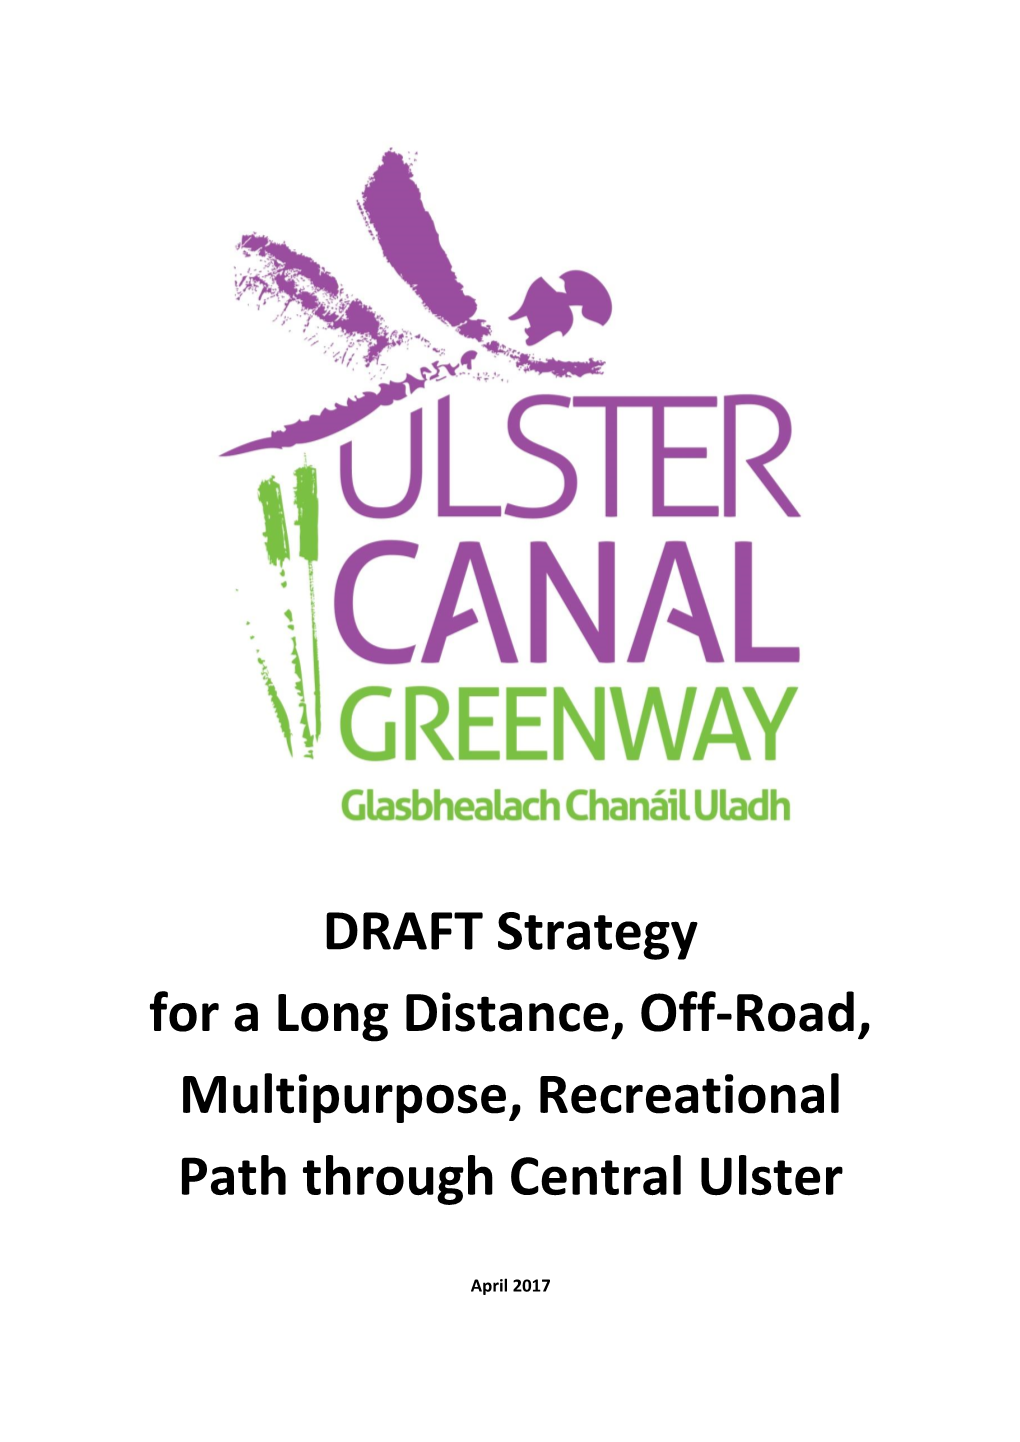 DRAFT Strategy for a Long Distance, Off-Road, Multipurpose, Recreational Path Through Central Ulster